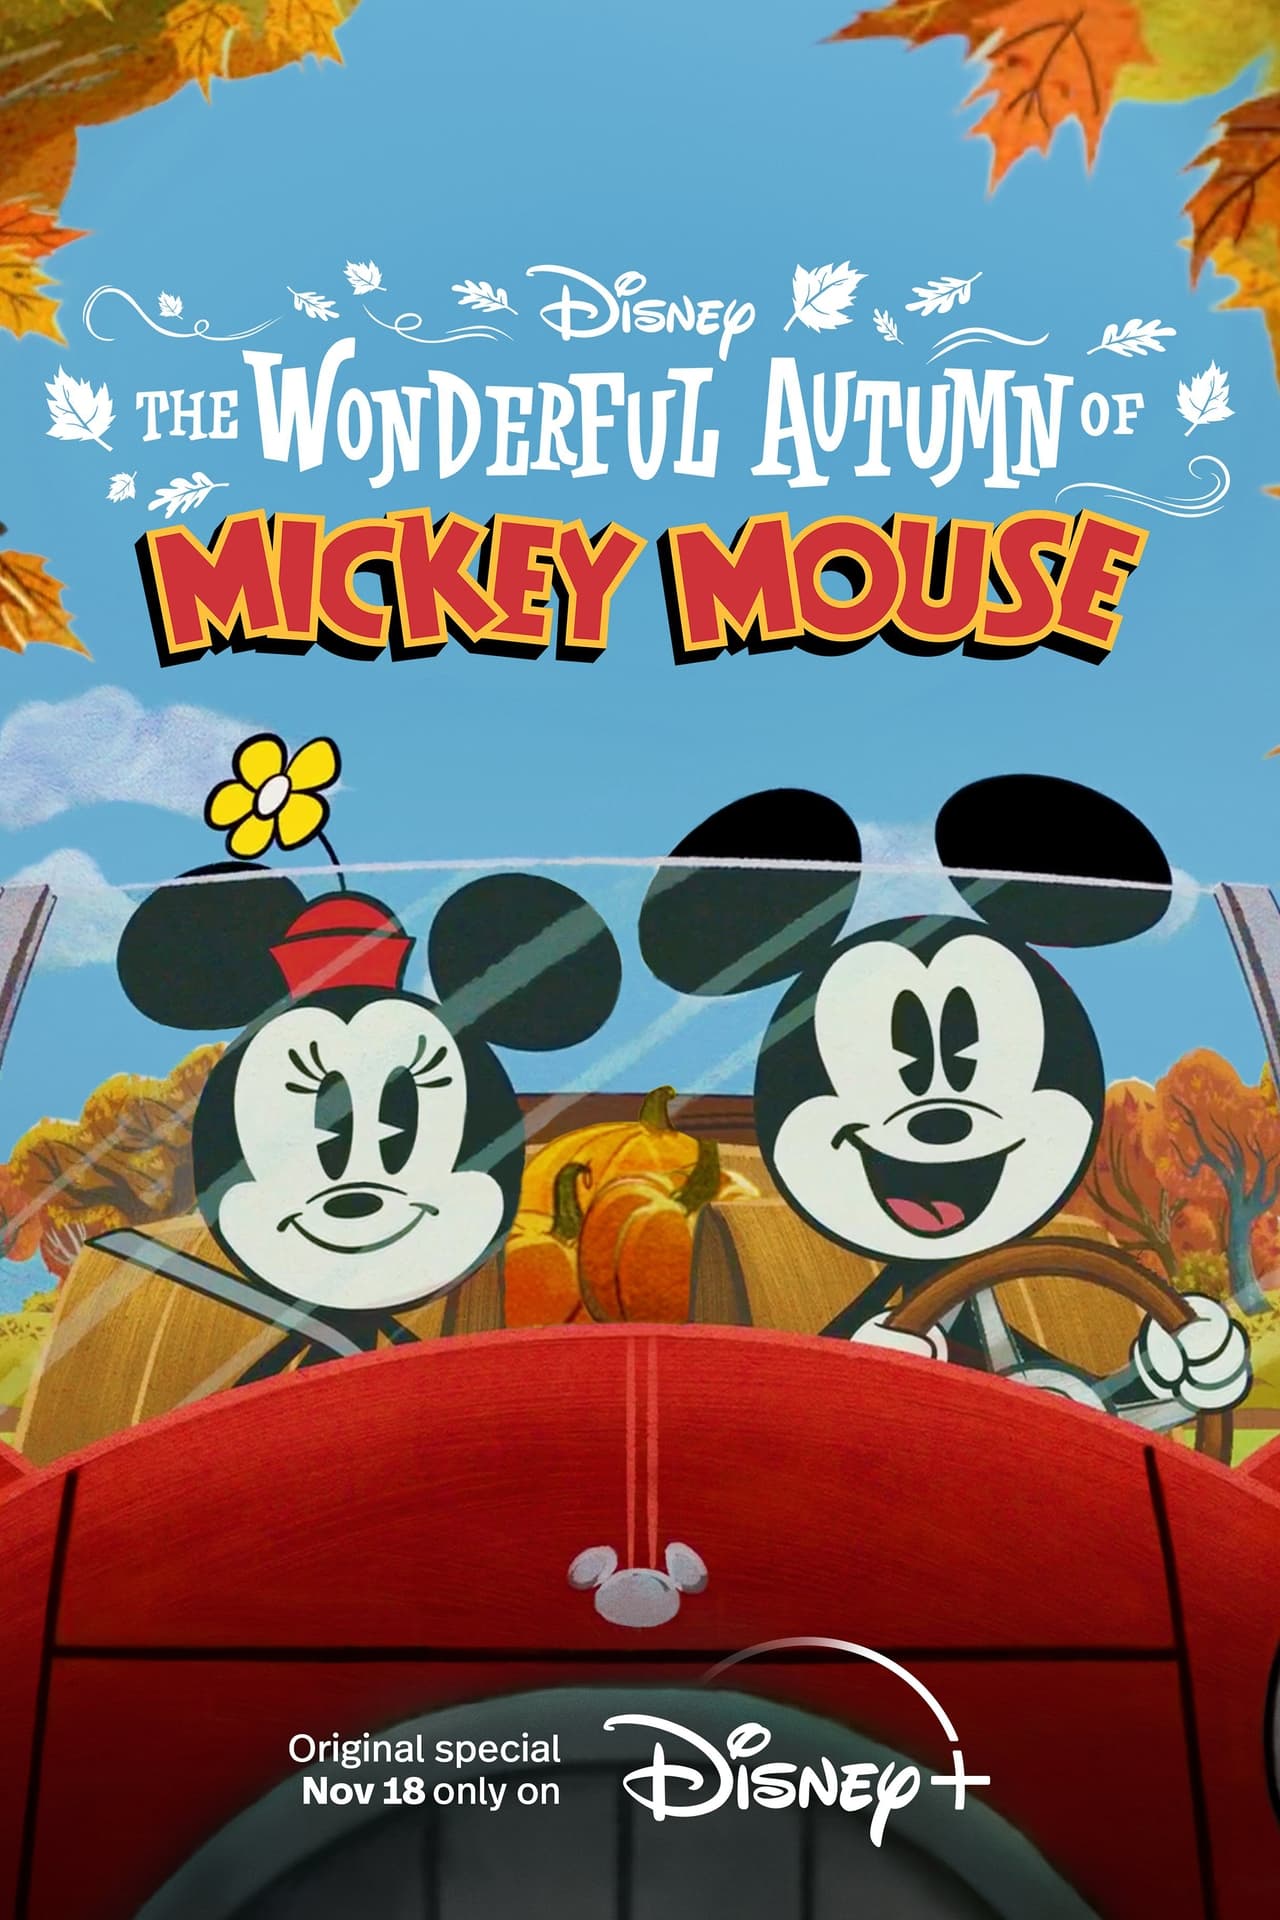 brandan holt recommends Mickey Mouse Pelicula